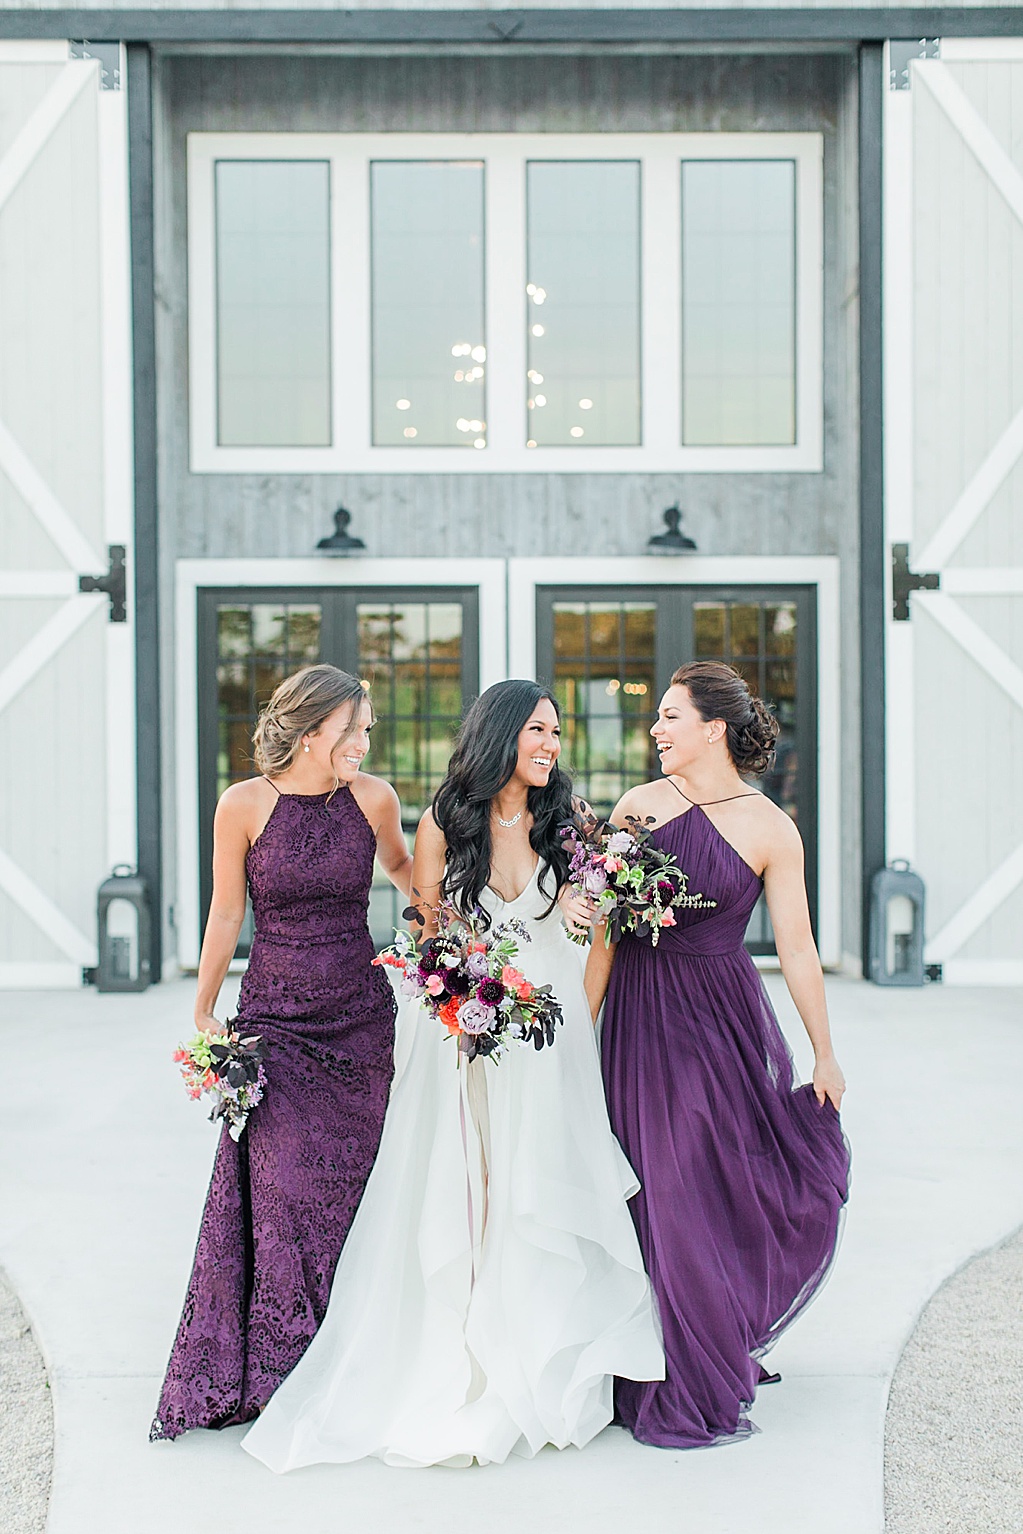 the barn at swallows eve wedding venue in fredericksburg texas photo inspiration featured on Grey Likes Weddings 0025